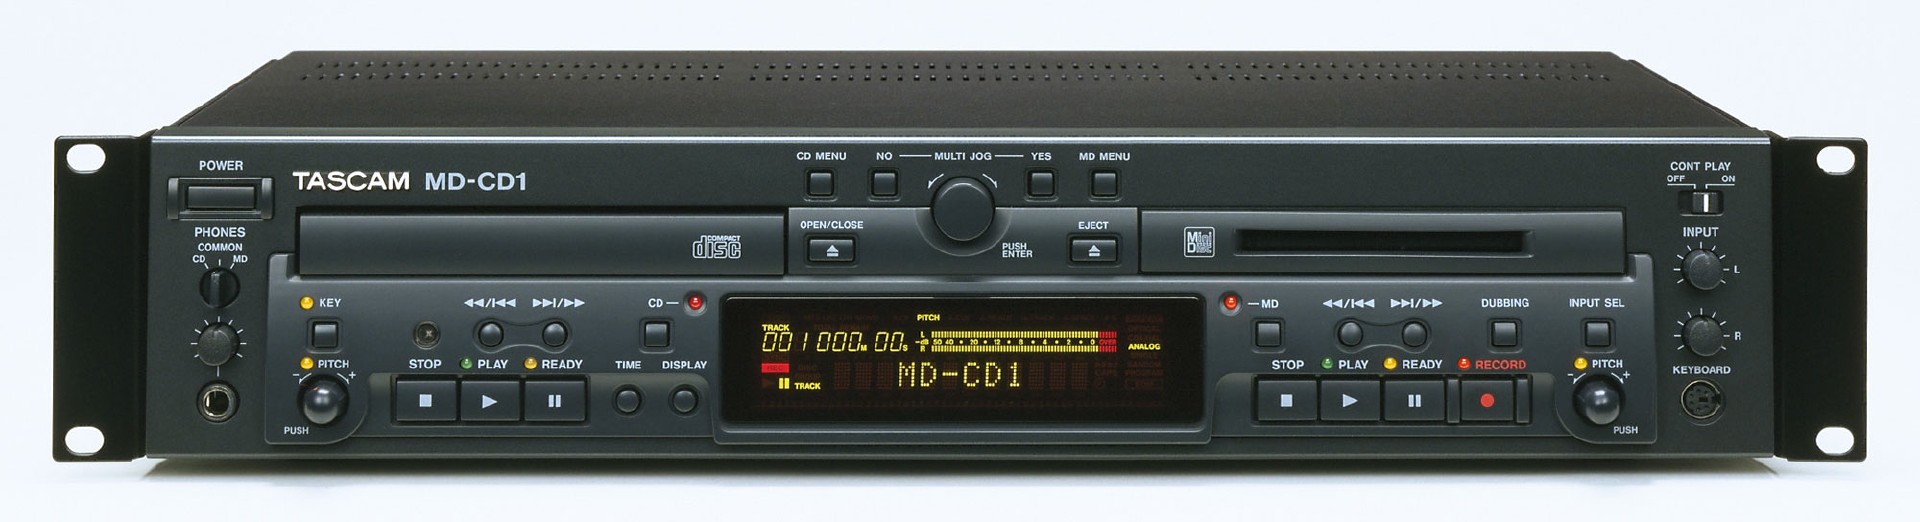 MD-CD1 | FEATURES | TASCAM | International Website| | FEATURES